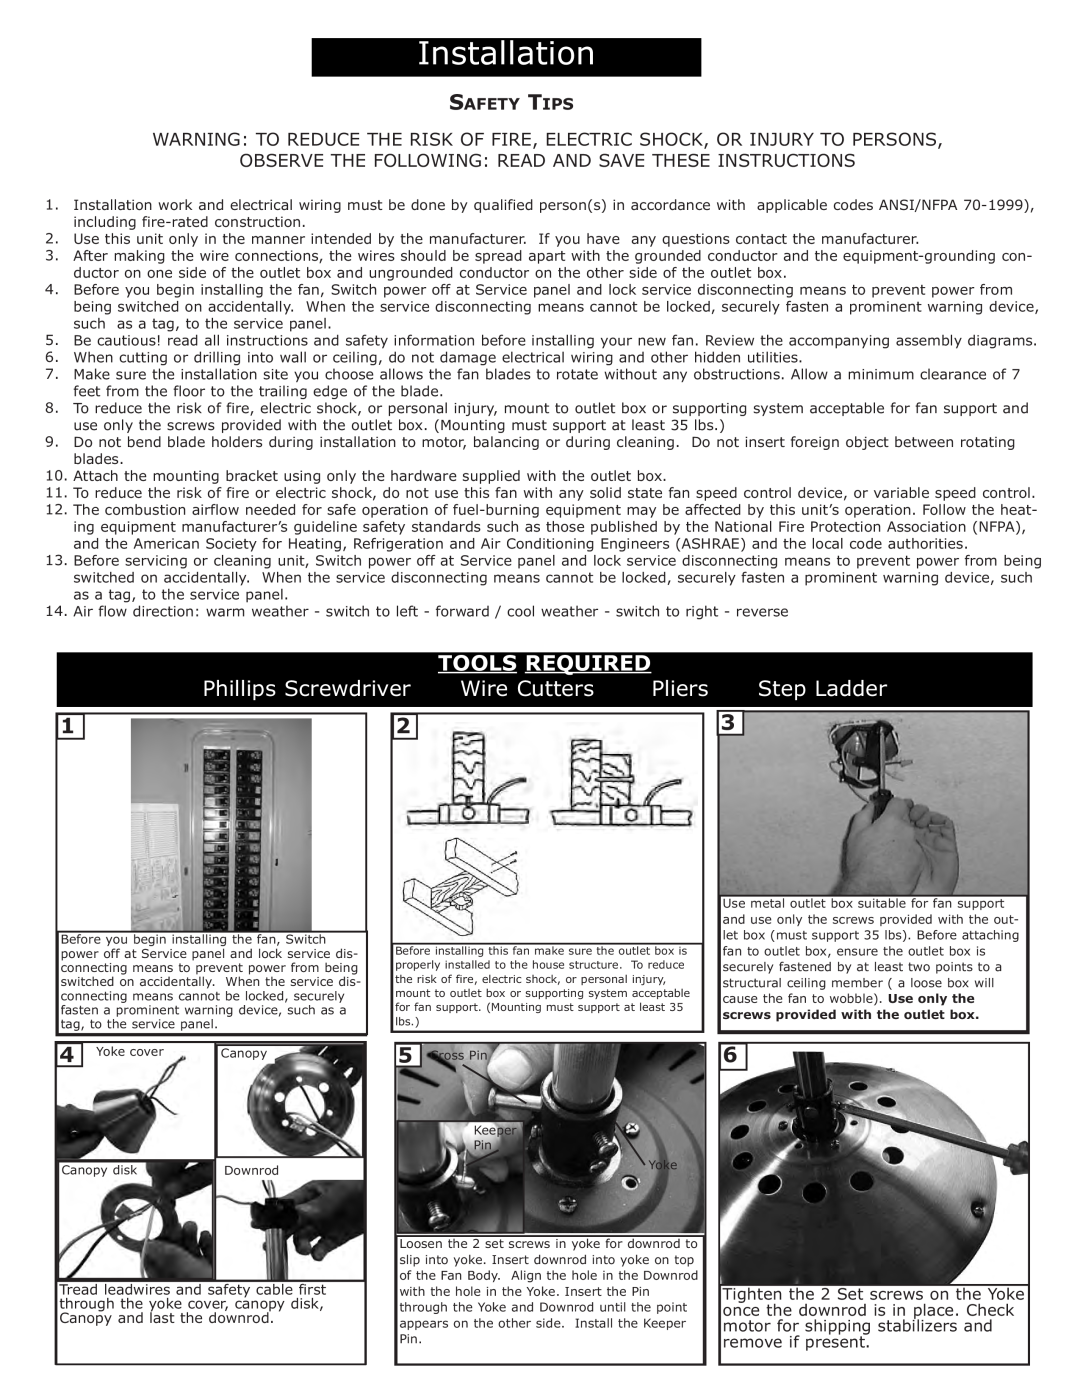 Monte Carlo Fan Company 5MS52 Observe The Following Read And Save These Instructions, Safety Tips, Phillips Screwdriver 